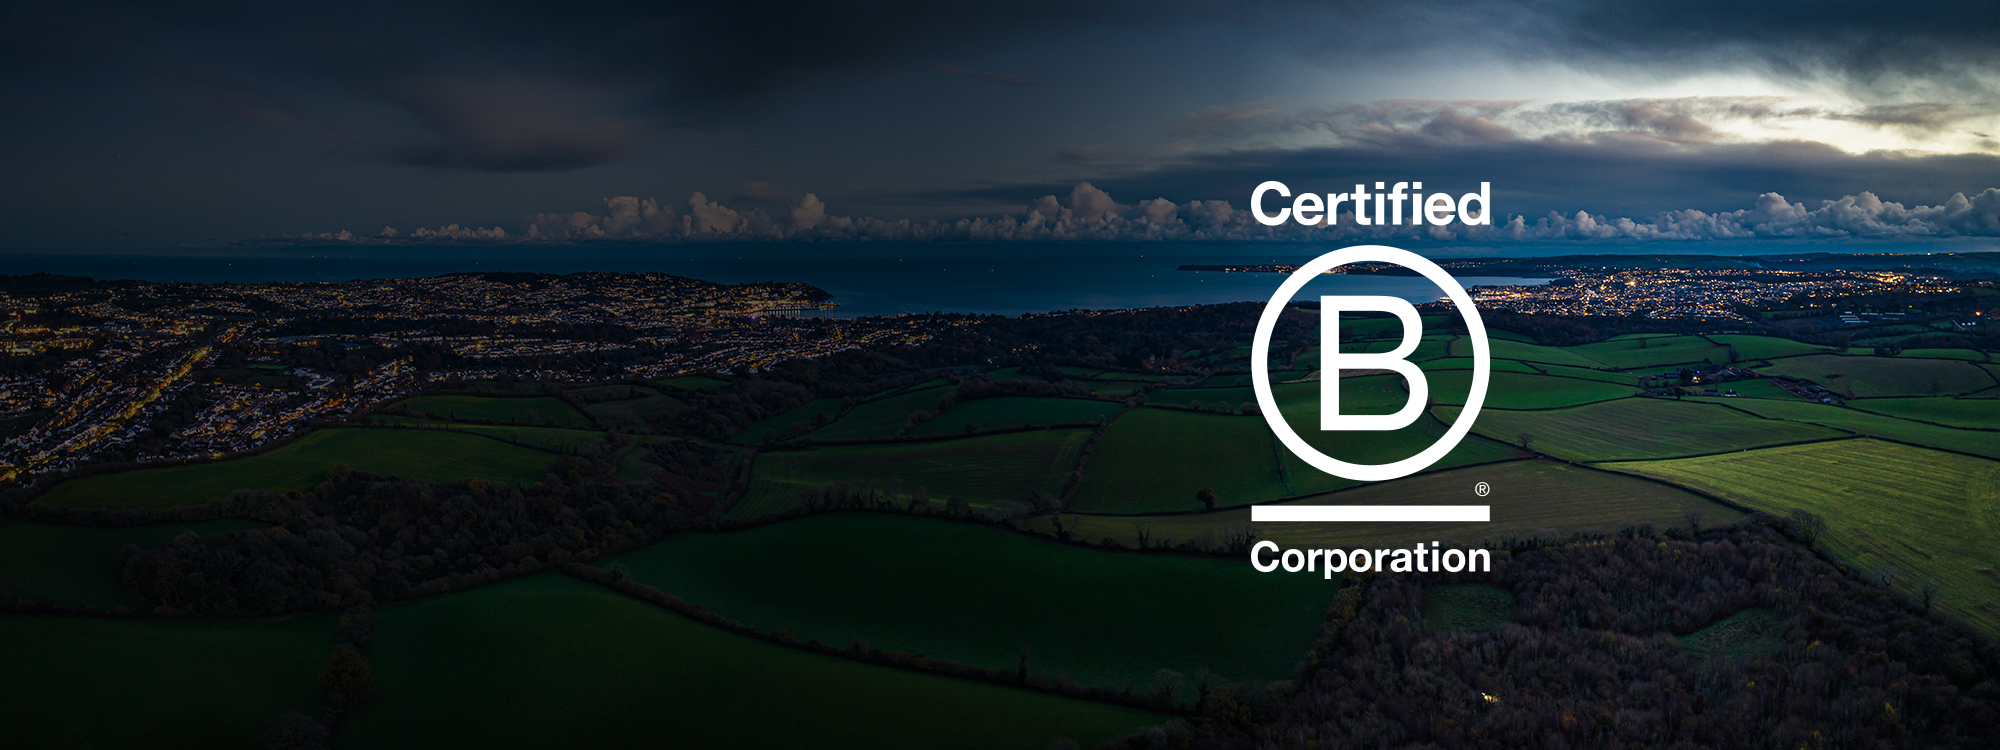 RPA Certified by B Corporation banner